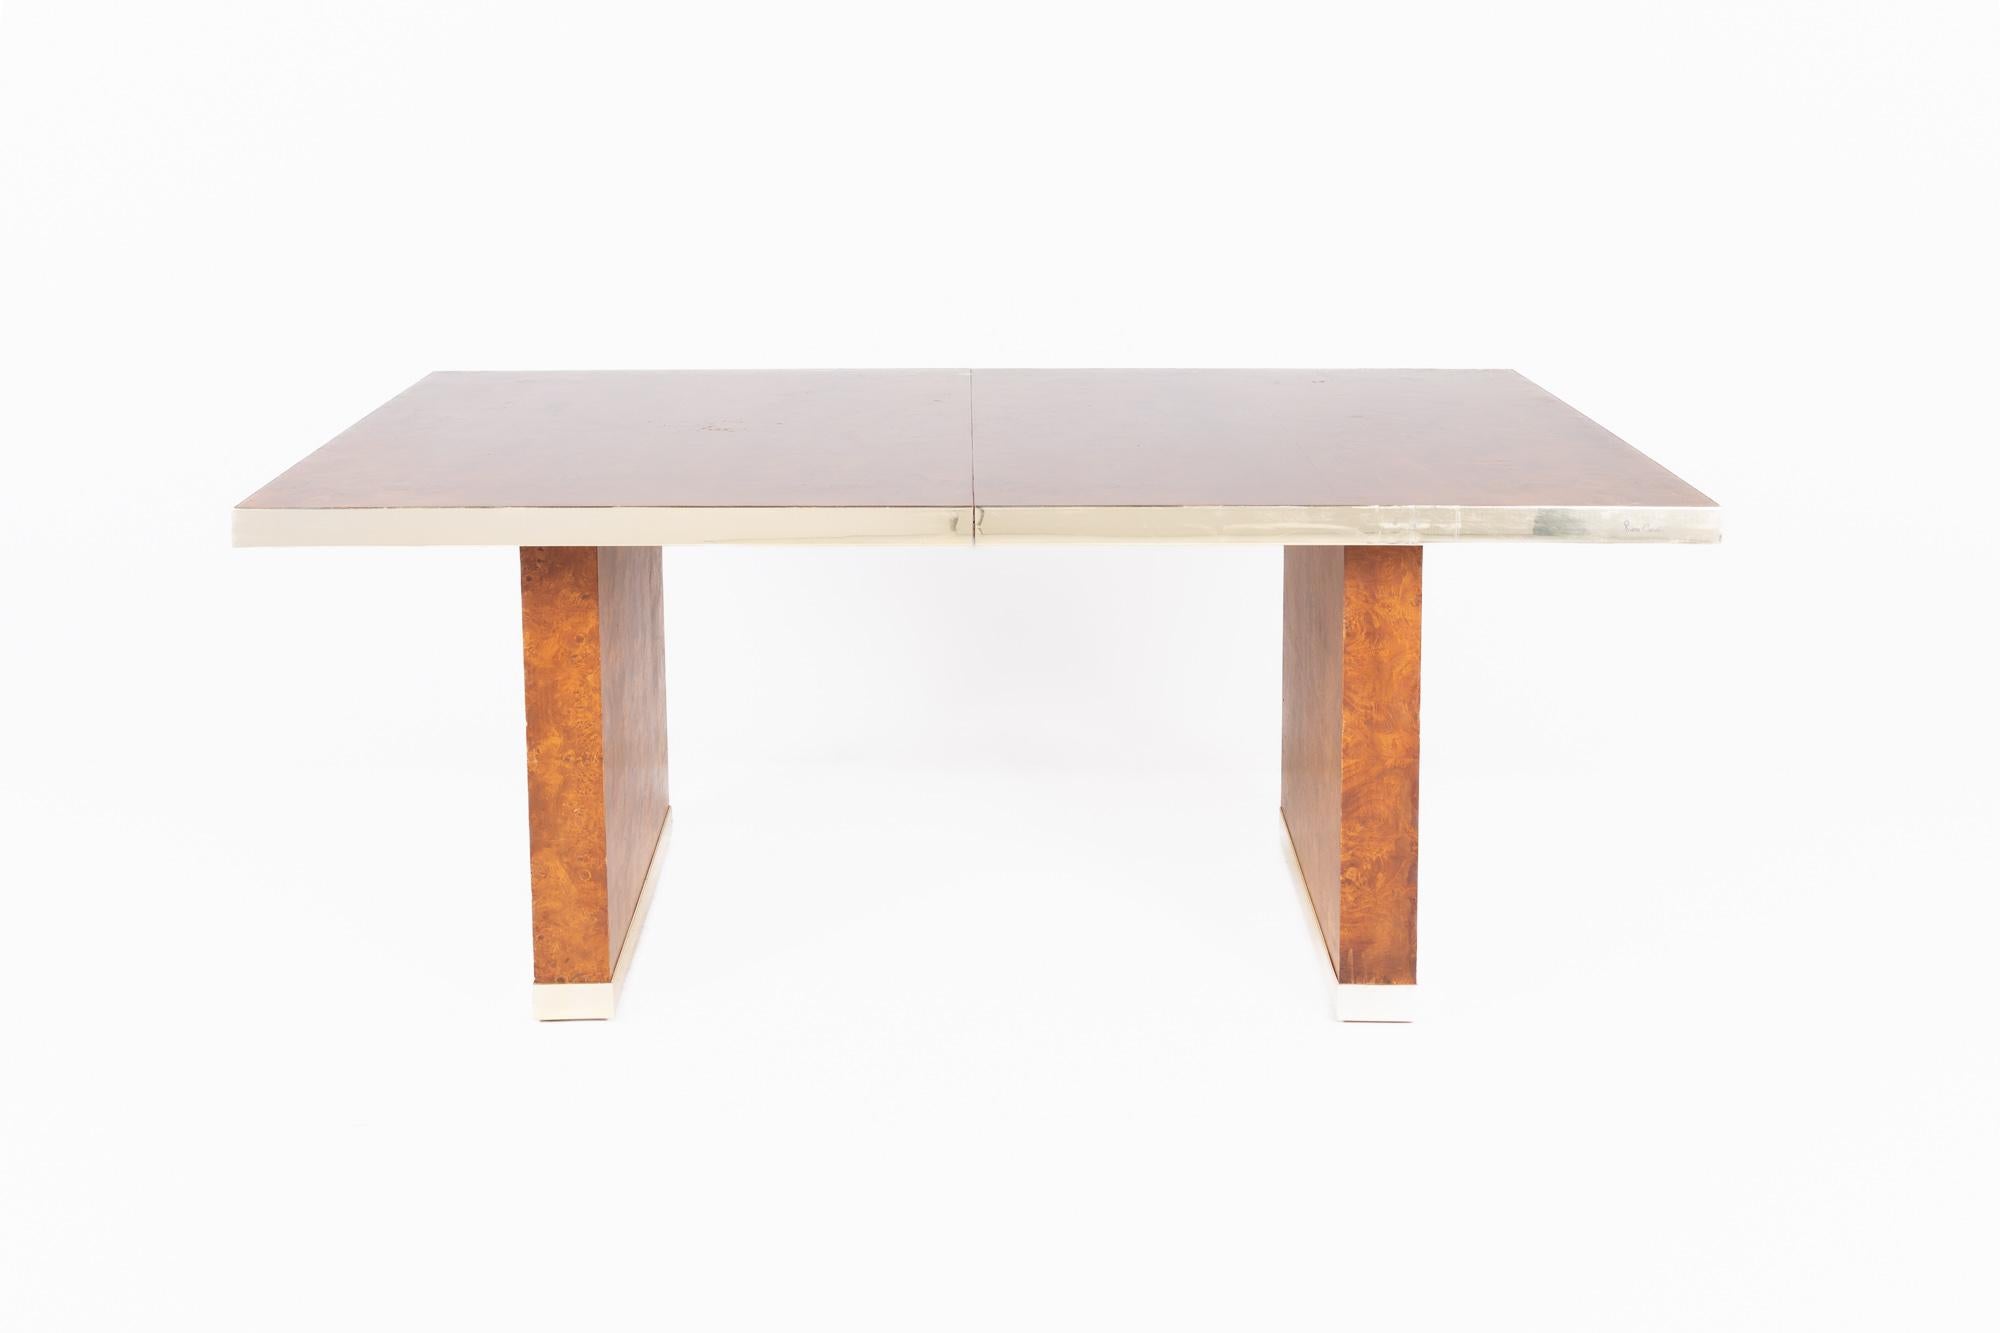 Pierre Cardin mid century burlwood and brass dining table

This table measures: 72 wide x 38 deep x 29 high, with a chair clearance of 26.5 inches, each leaf measures 18 inches wide, making a maximum table width of 108 inches when both leaves are